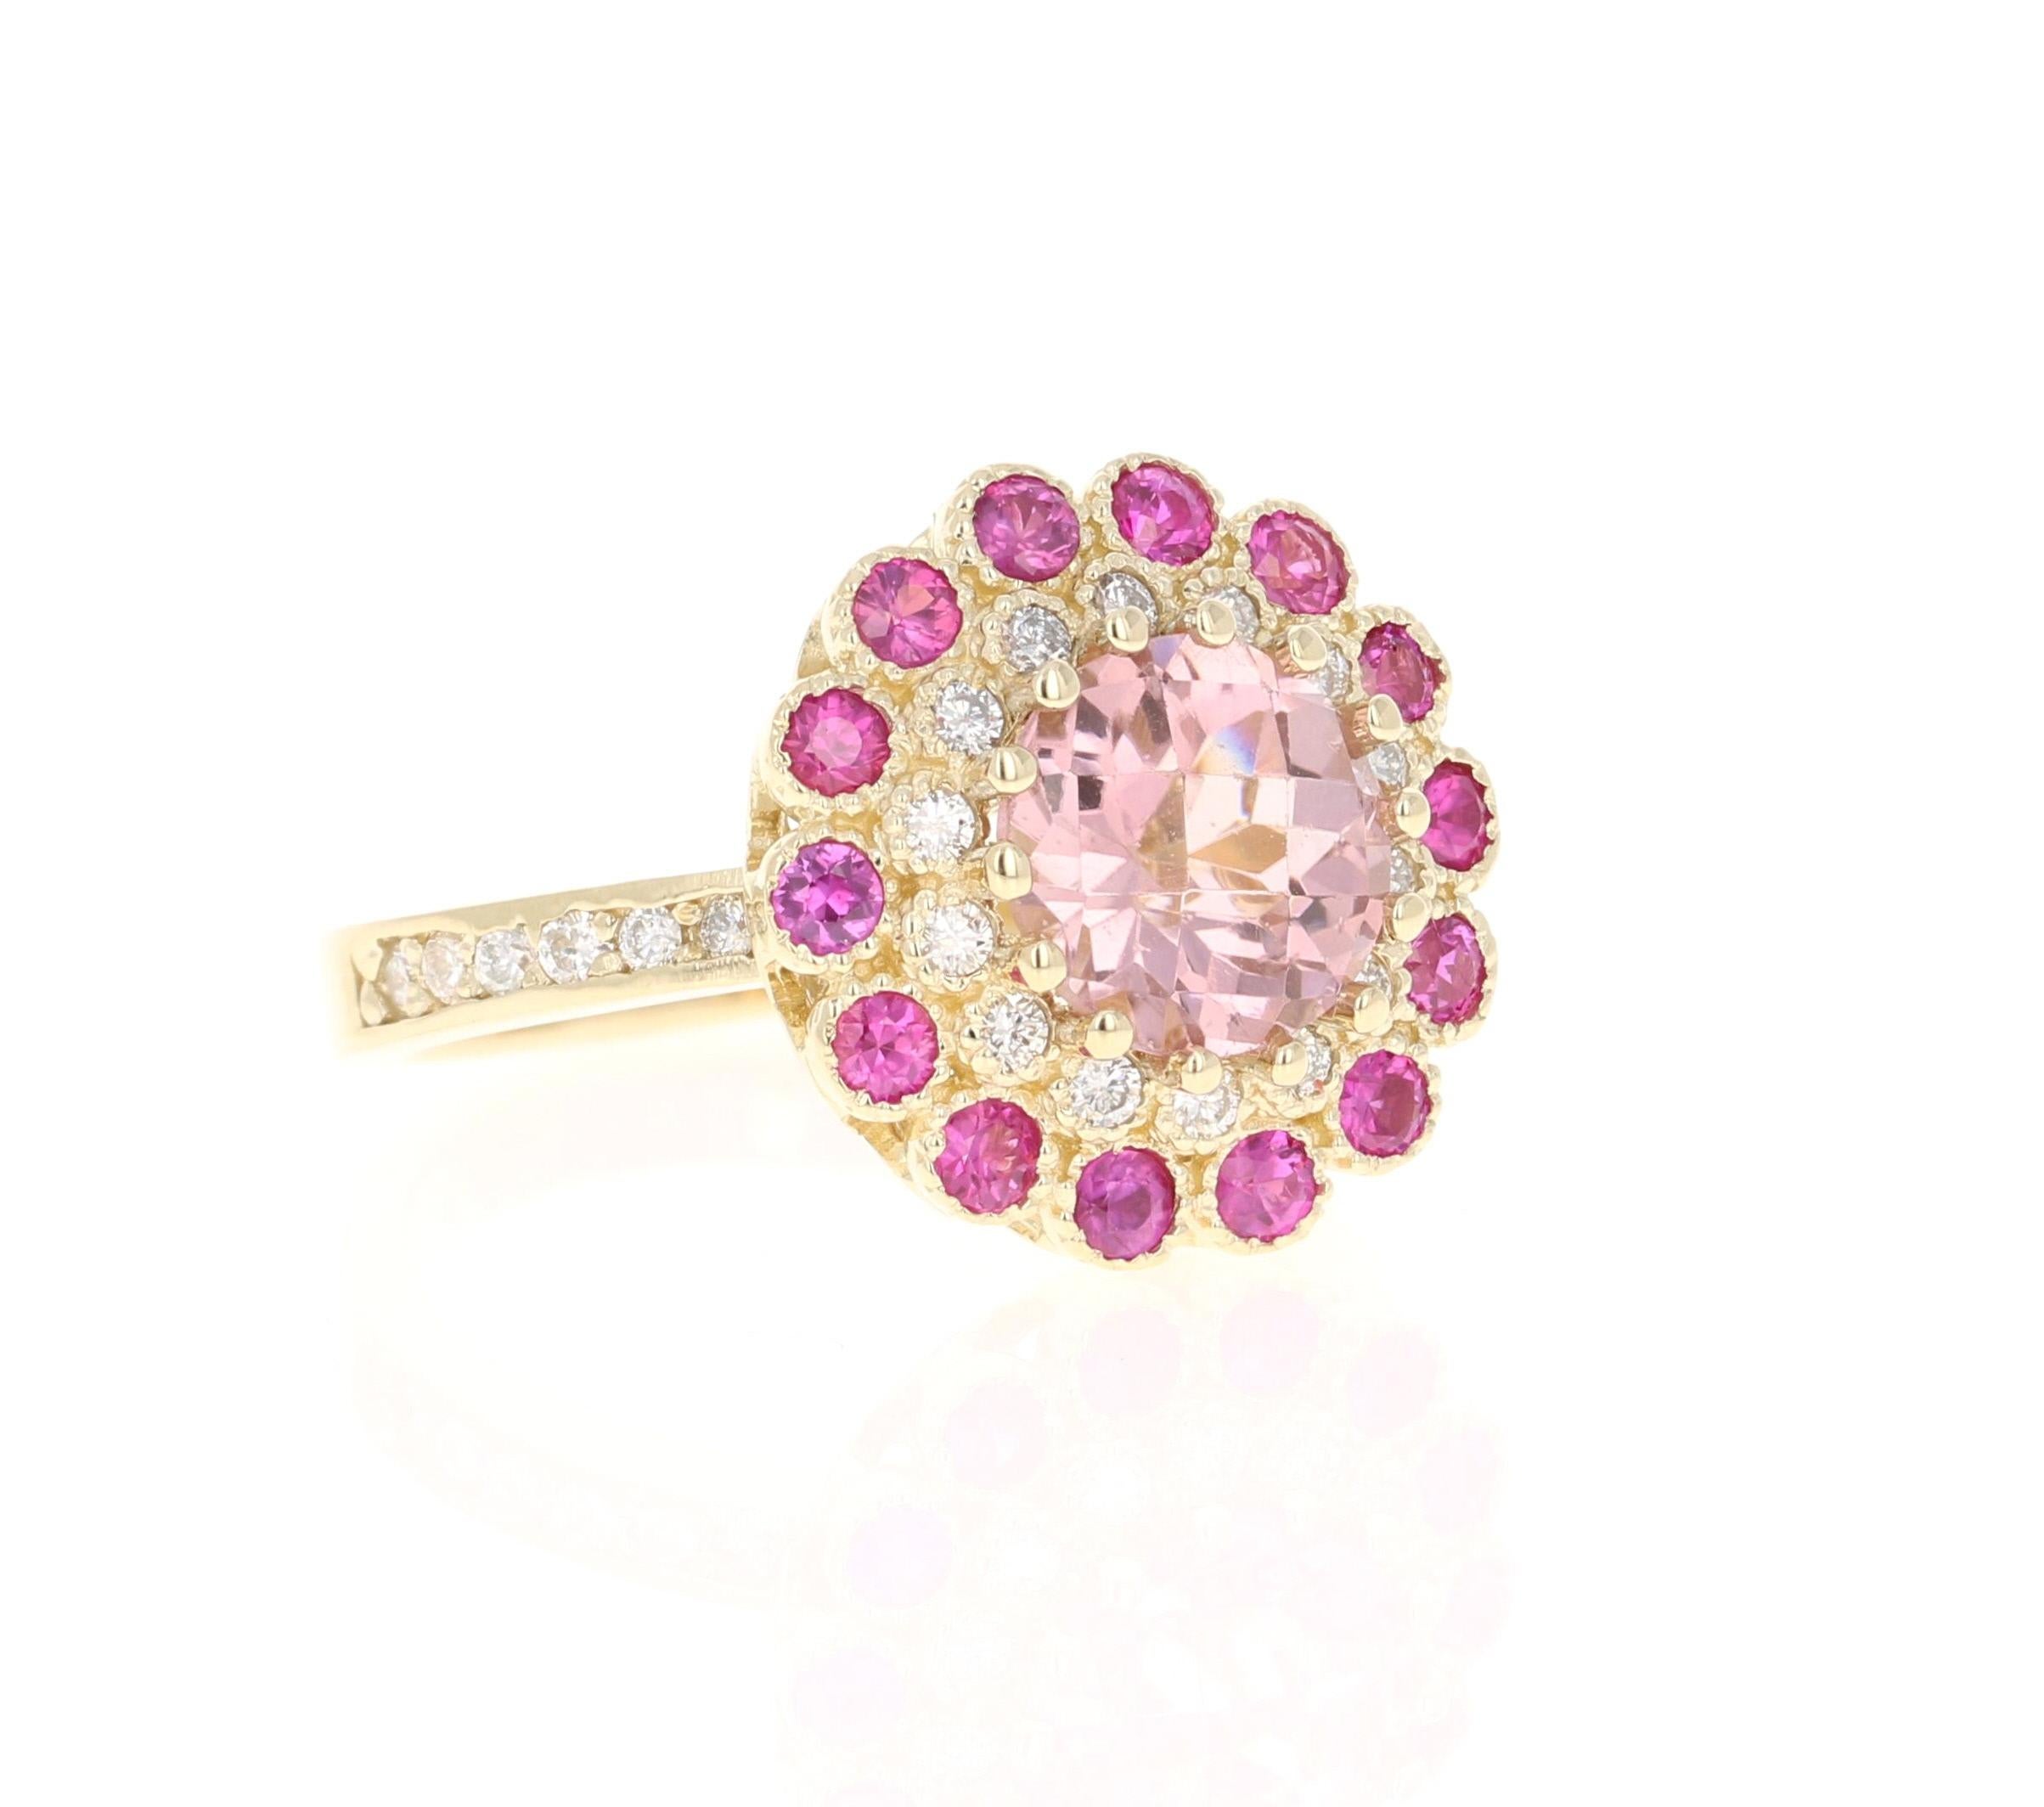 This ring has a round blush pink checkered cut tourmaline that weighs 2.08 carats and 14 pink sapphires that weigh 0.74 carats. There are also 26 round cut diamonds that weigh 0.34 carats. The total carat weight of the ring is 3.16 carats. 

This